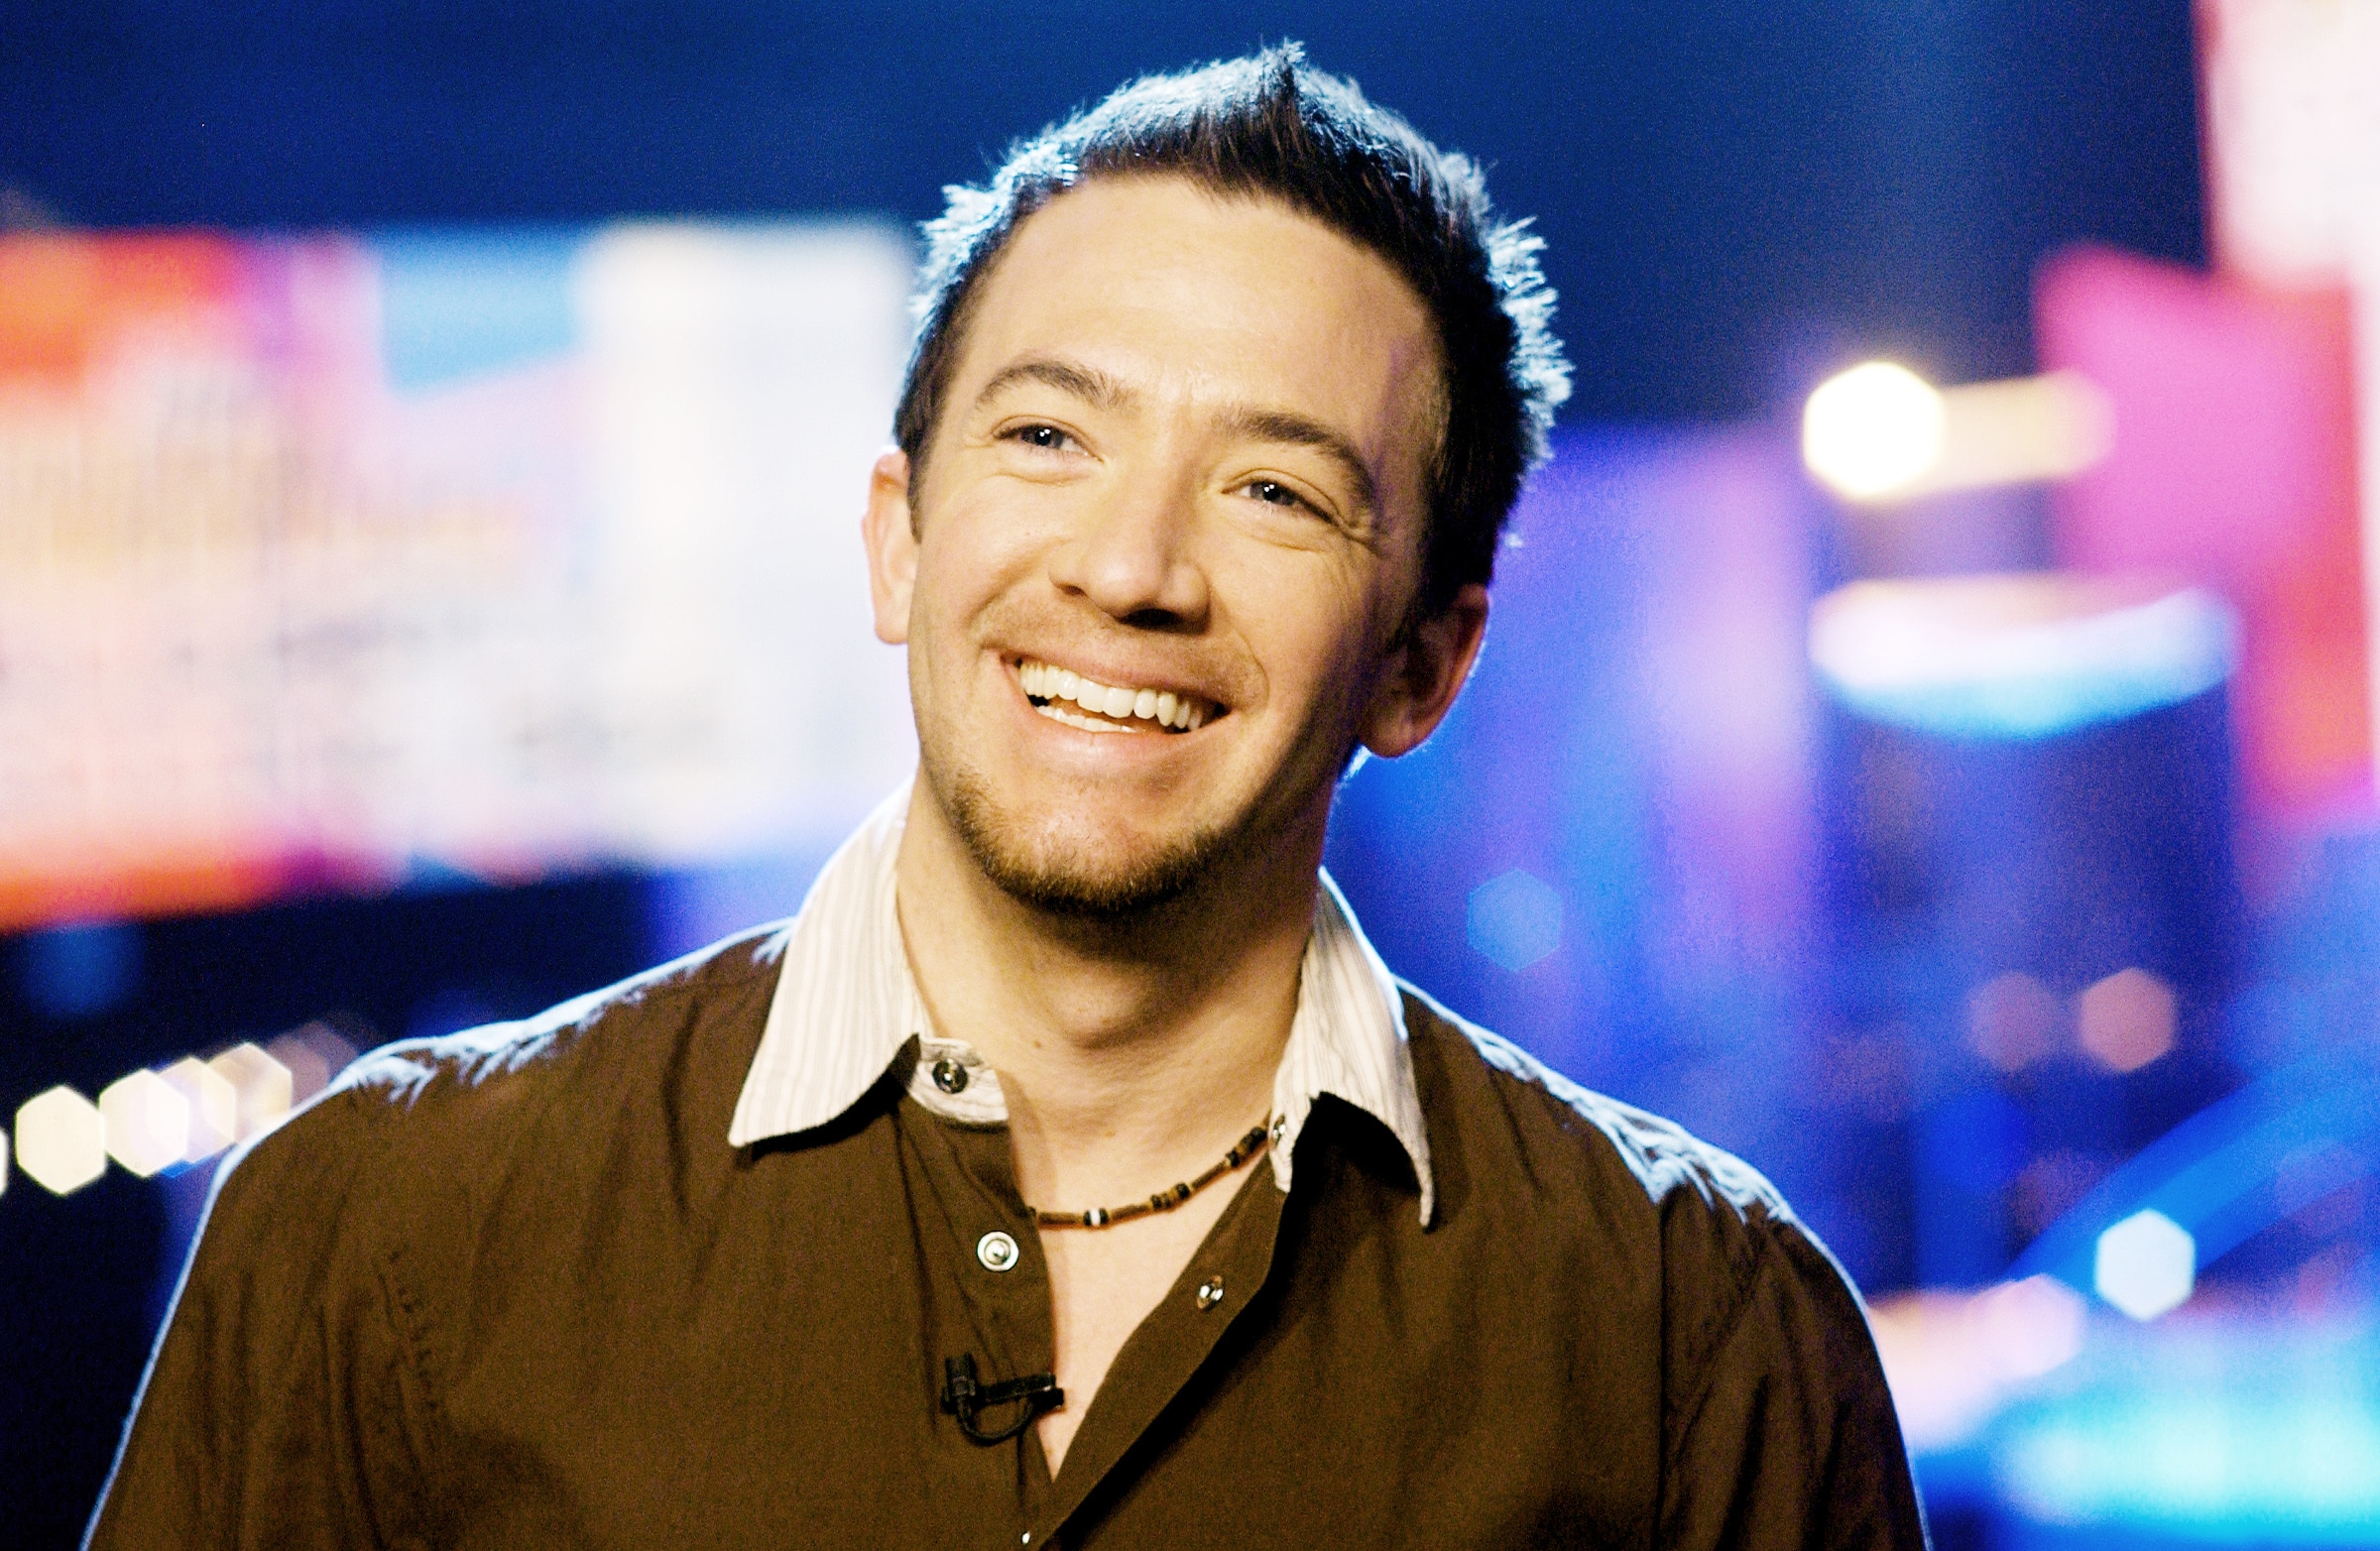 THE GREAT AMERICAN CELEBRITY SPELLING BEE, contestant David Faustino, 2004